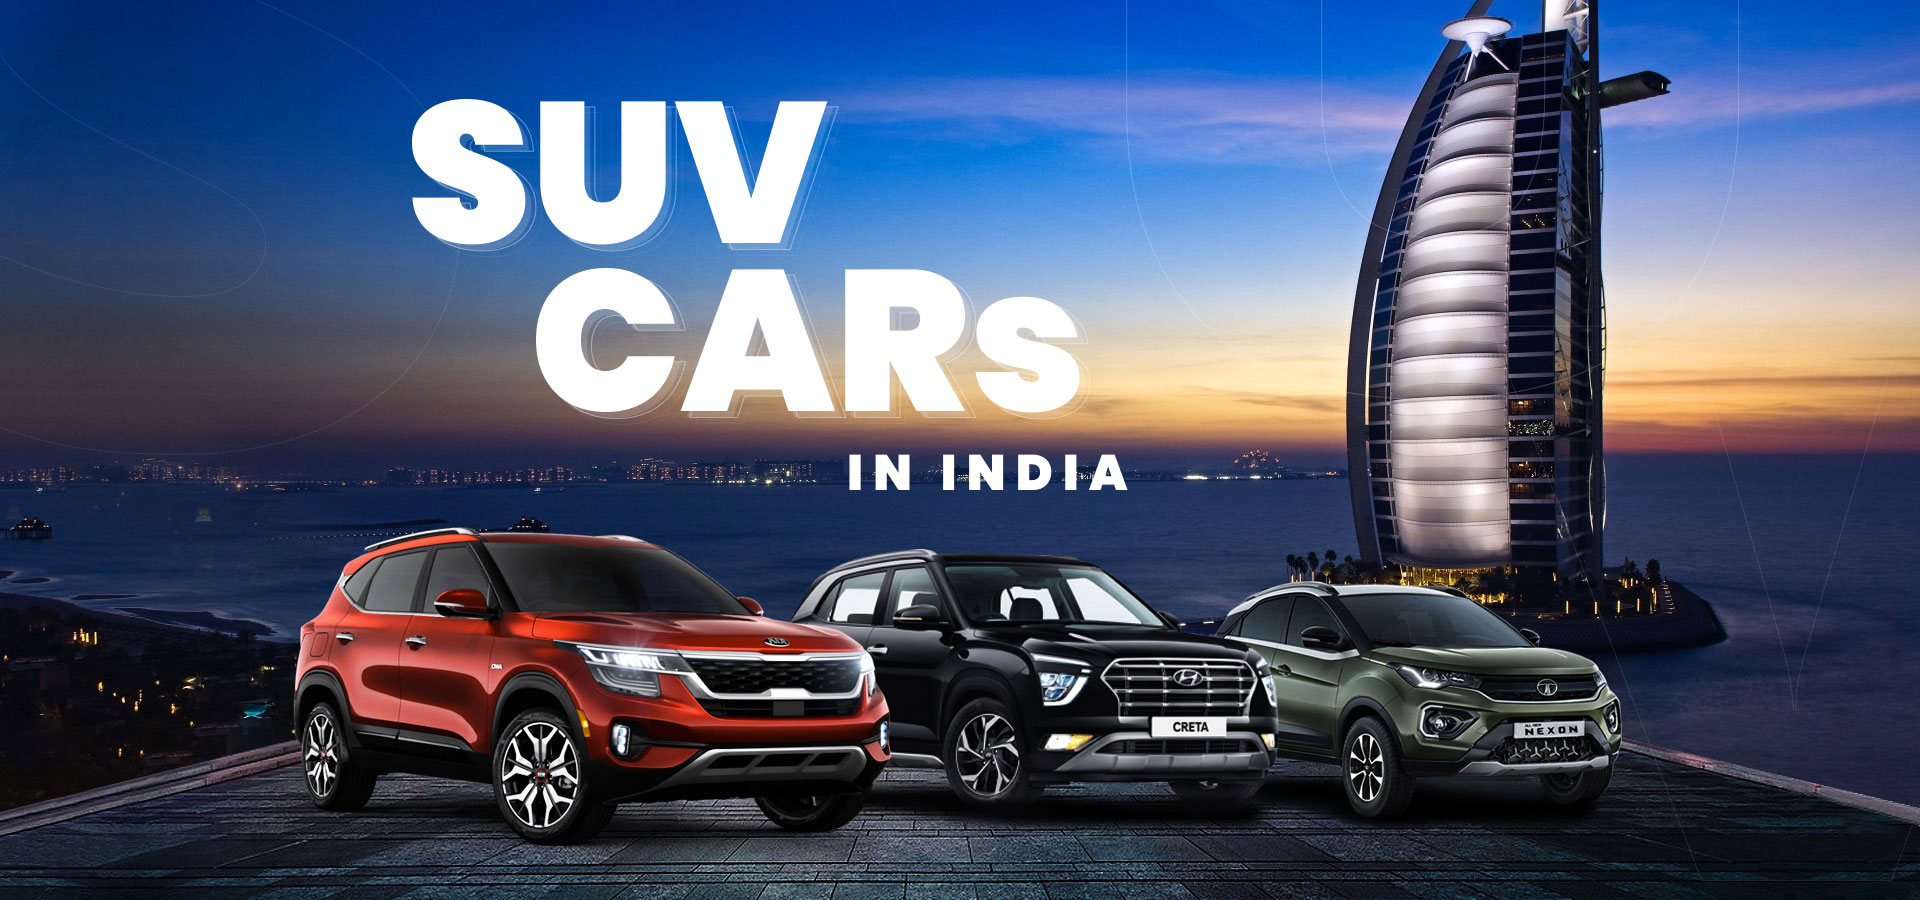 Suv cars in indian